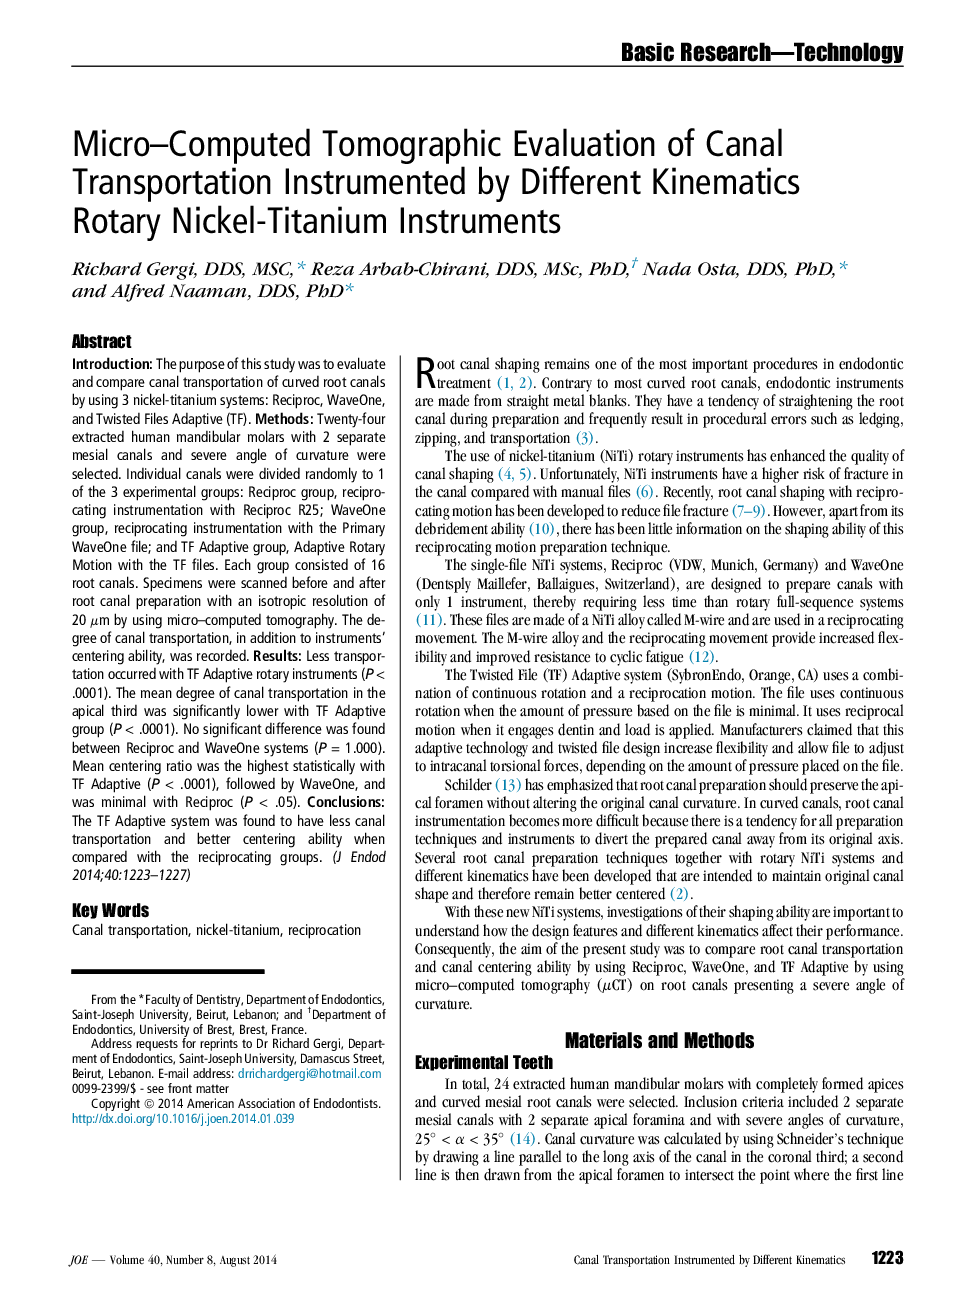 Micro-Computed Tomographic Evaluation of Canal Transportation Instrumented by Different Kinematics Rotary Nickel-Titanium Instruments